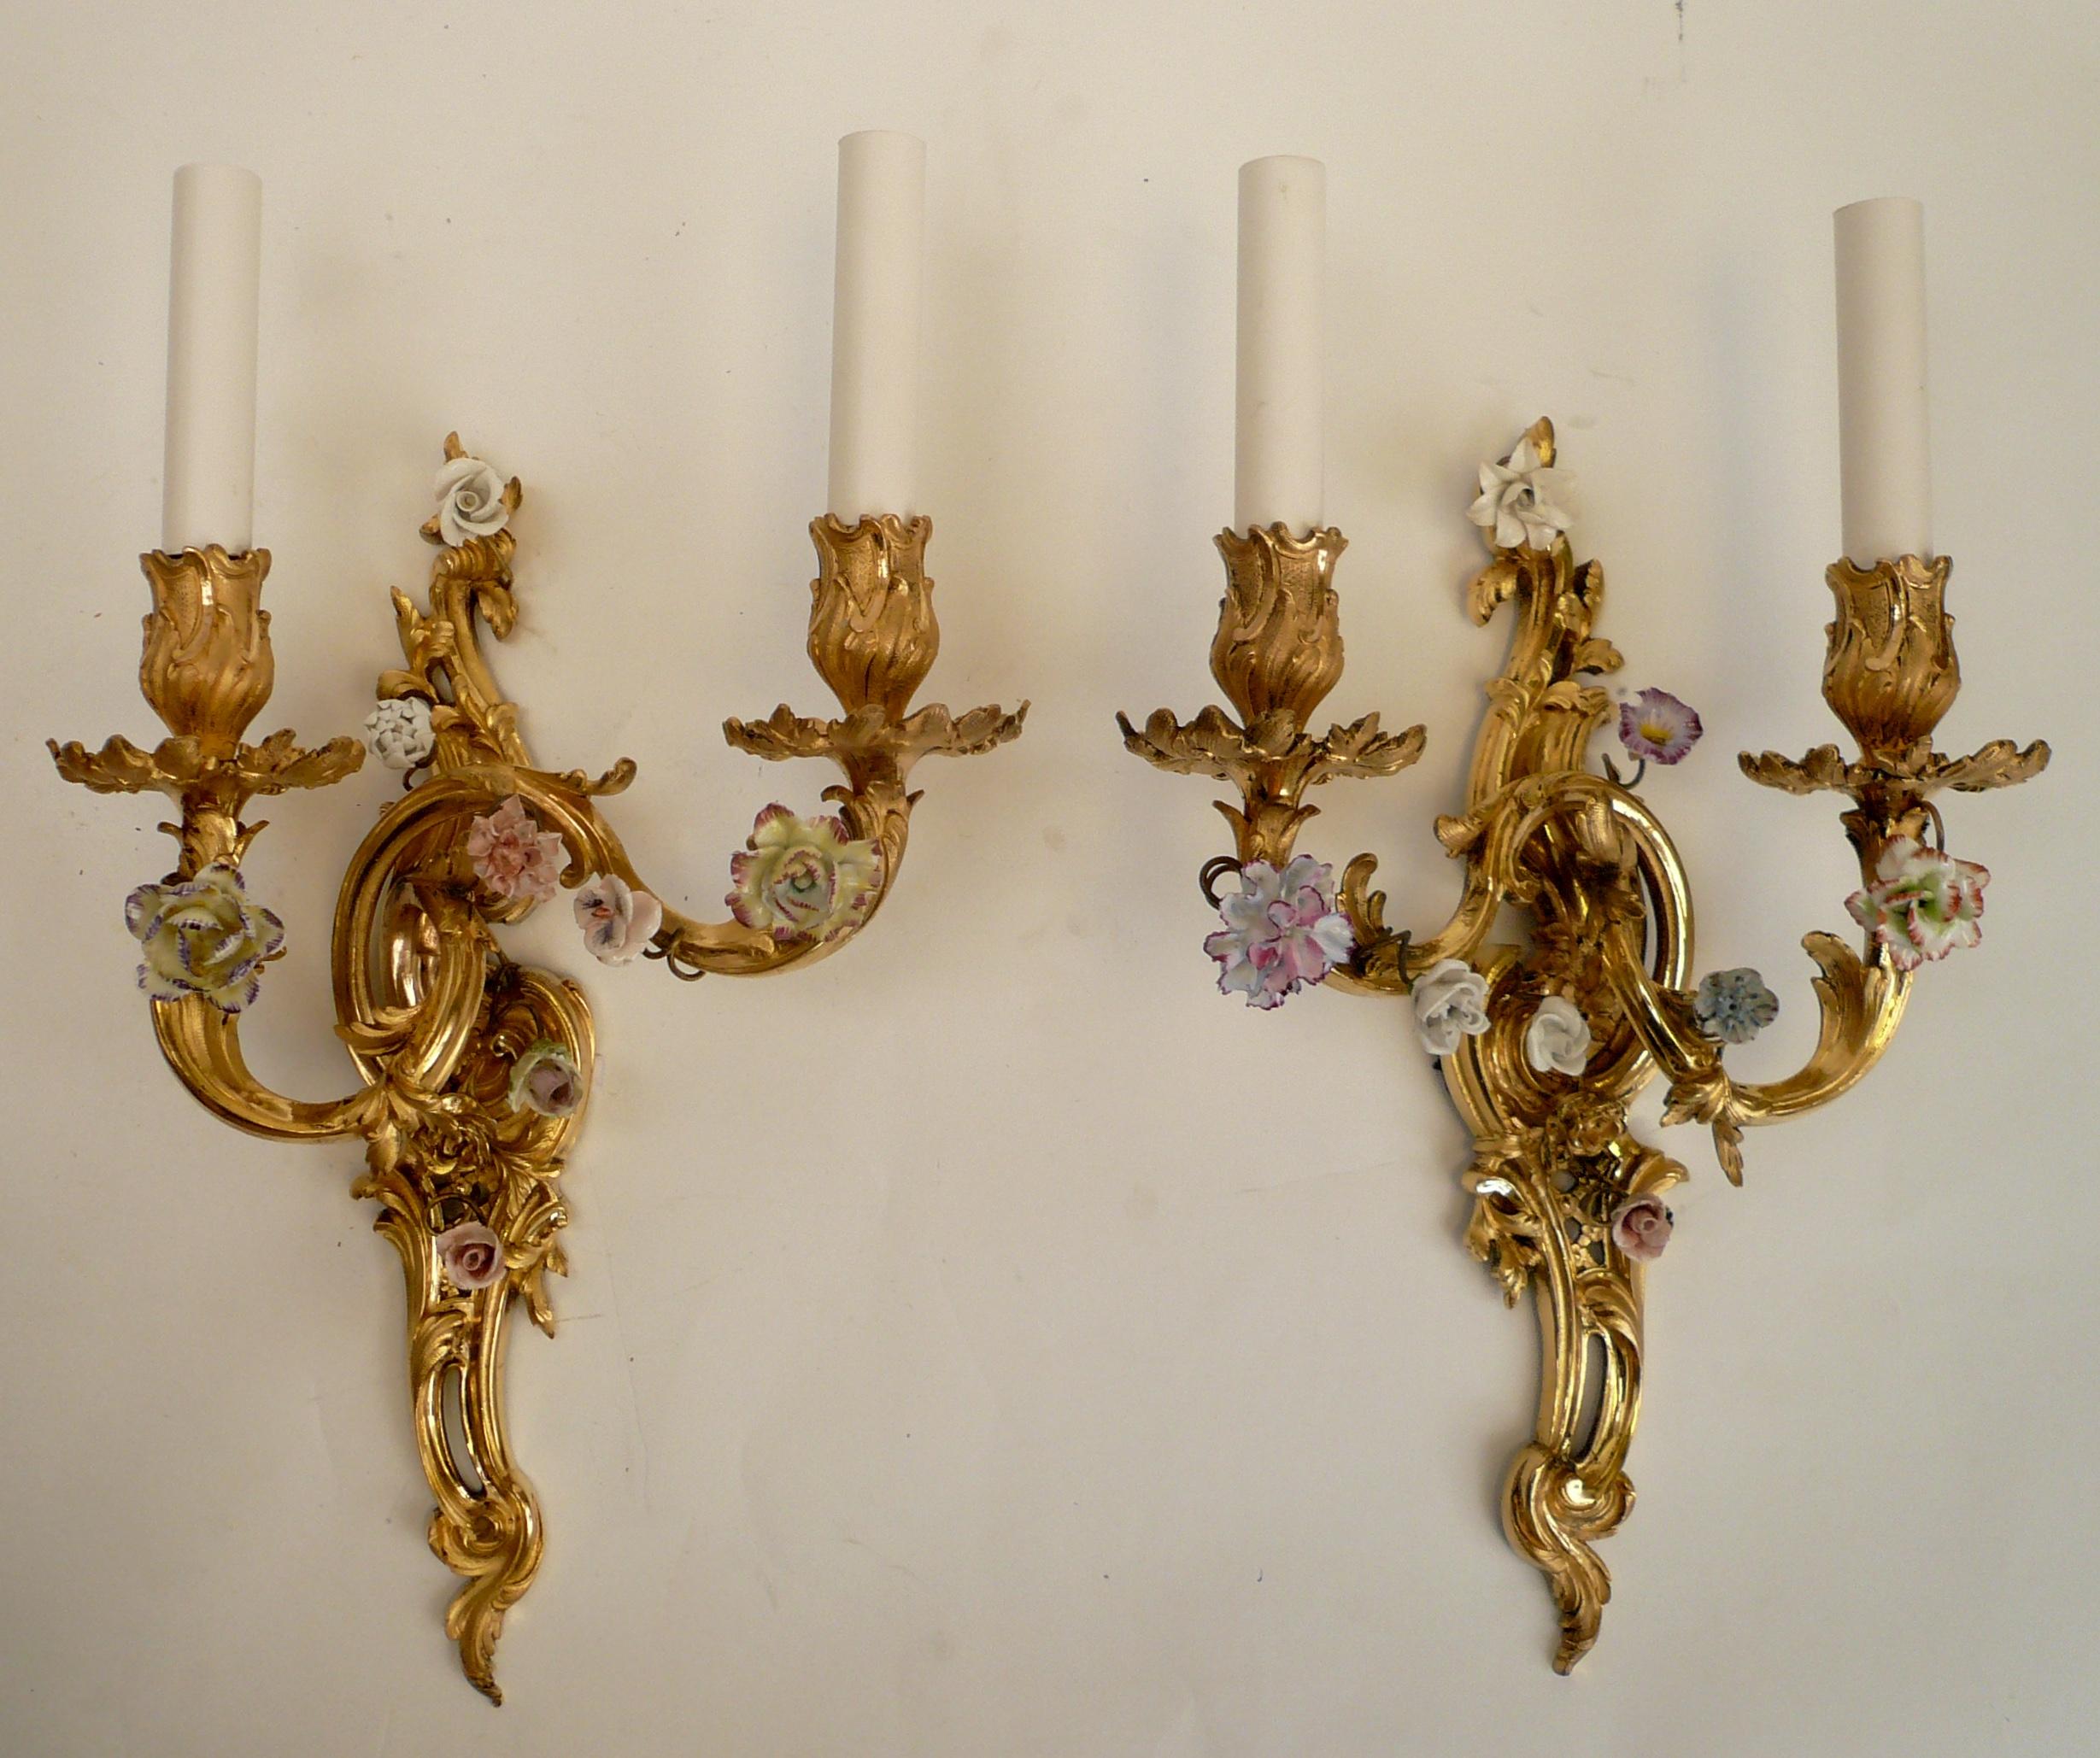 This beautiful pair of Louis XV style sconces are finely cast, hand chased, and burnished in gilt bronze. They feature scroll and foliate motifs, and are mounted with hand painted porcelain flowers.